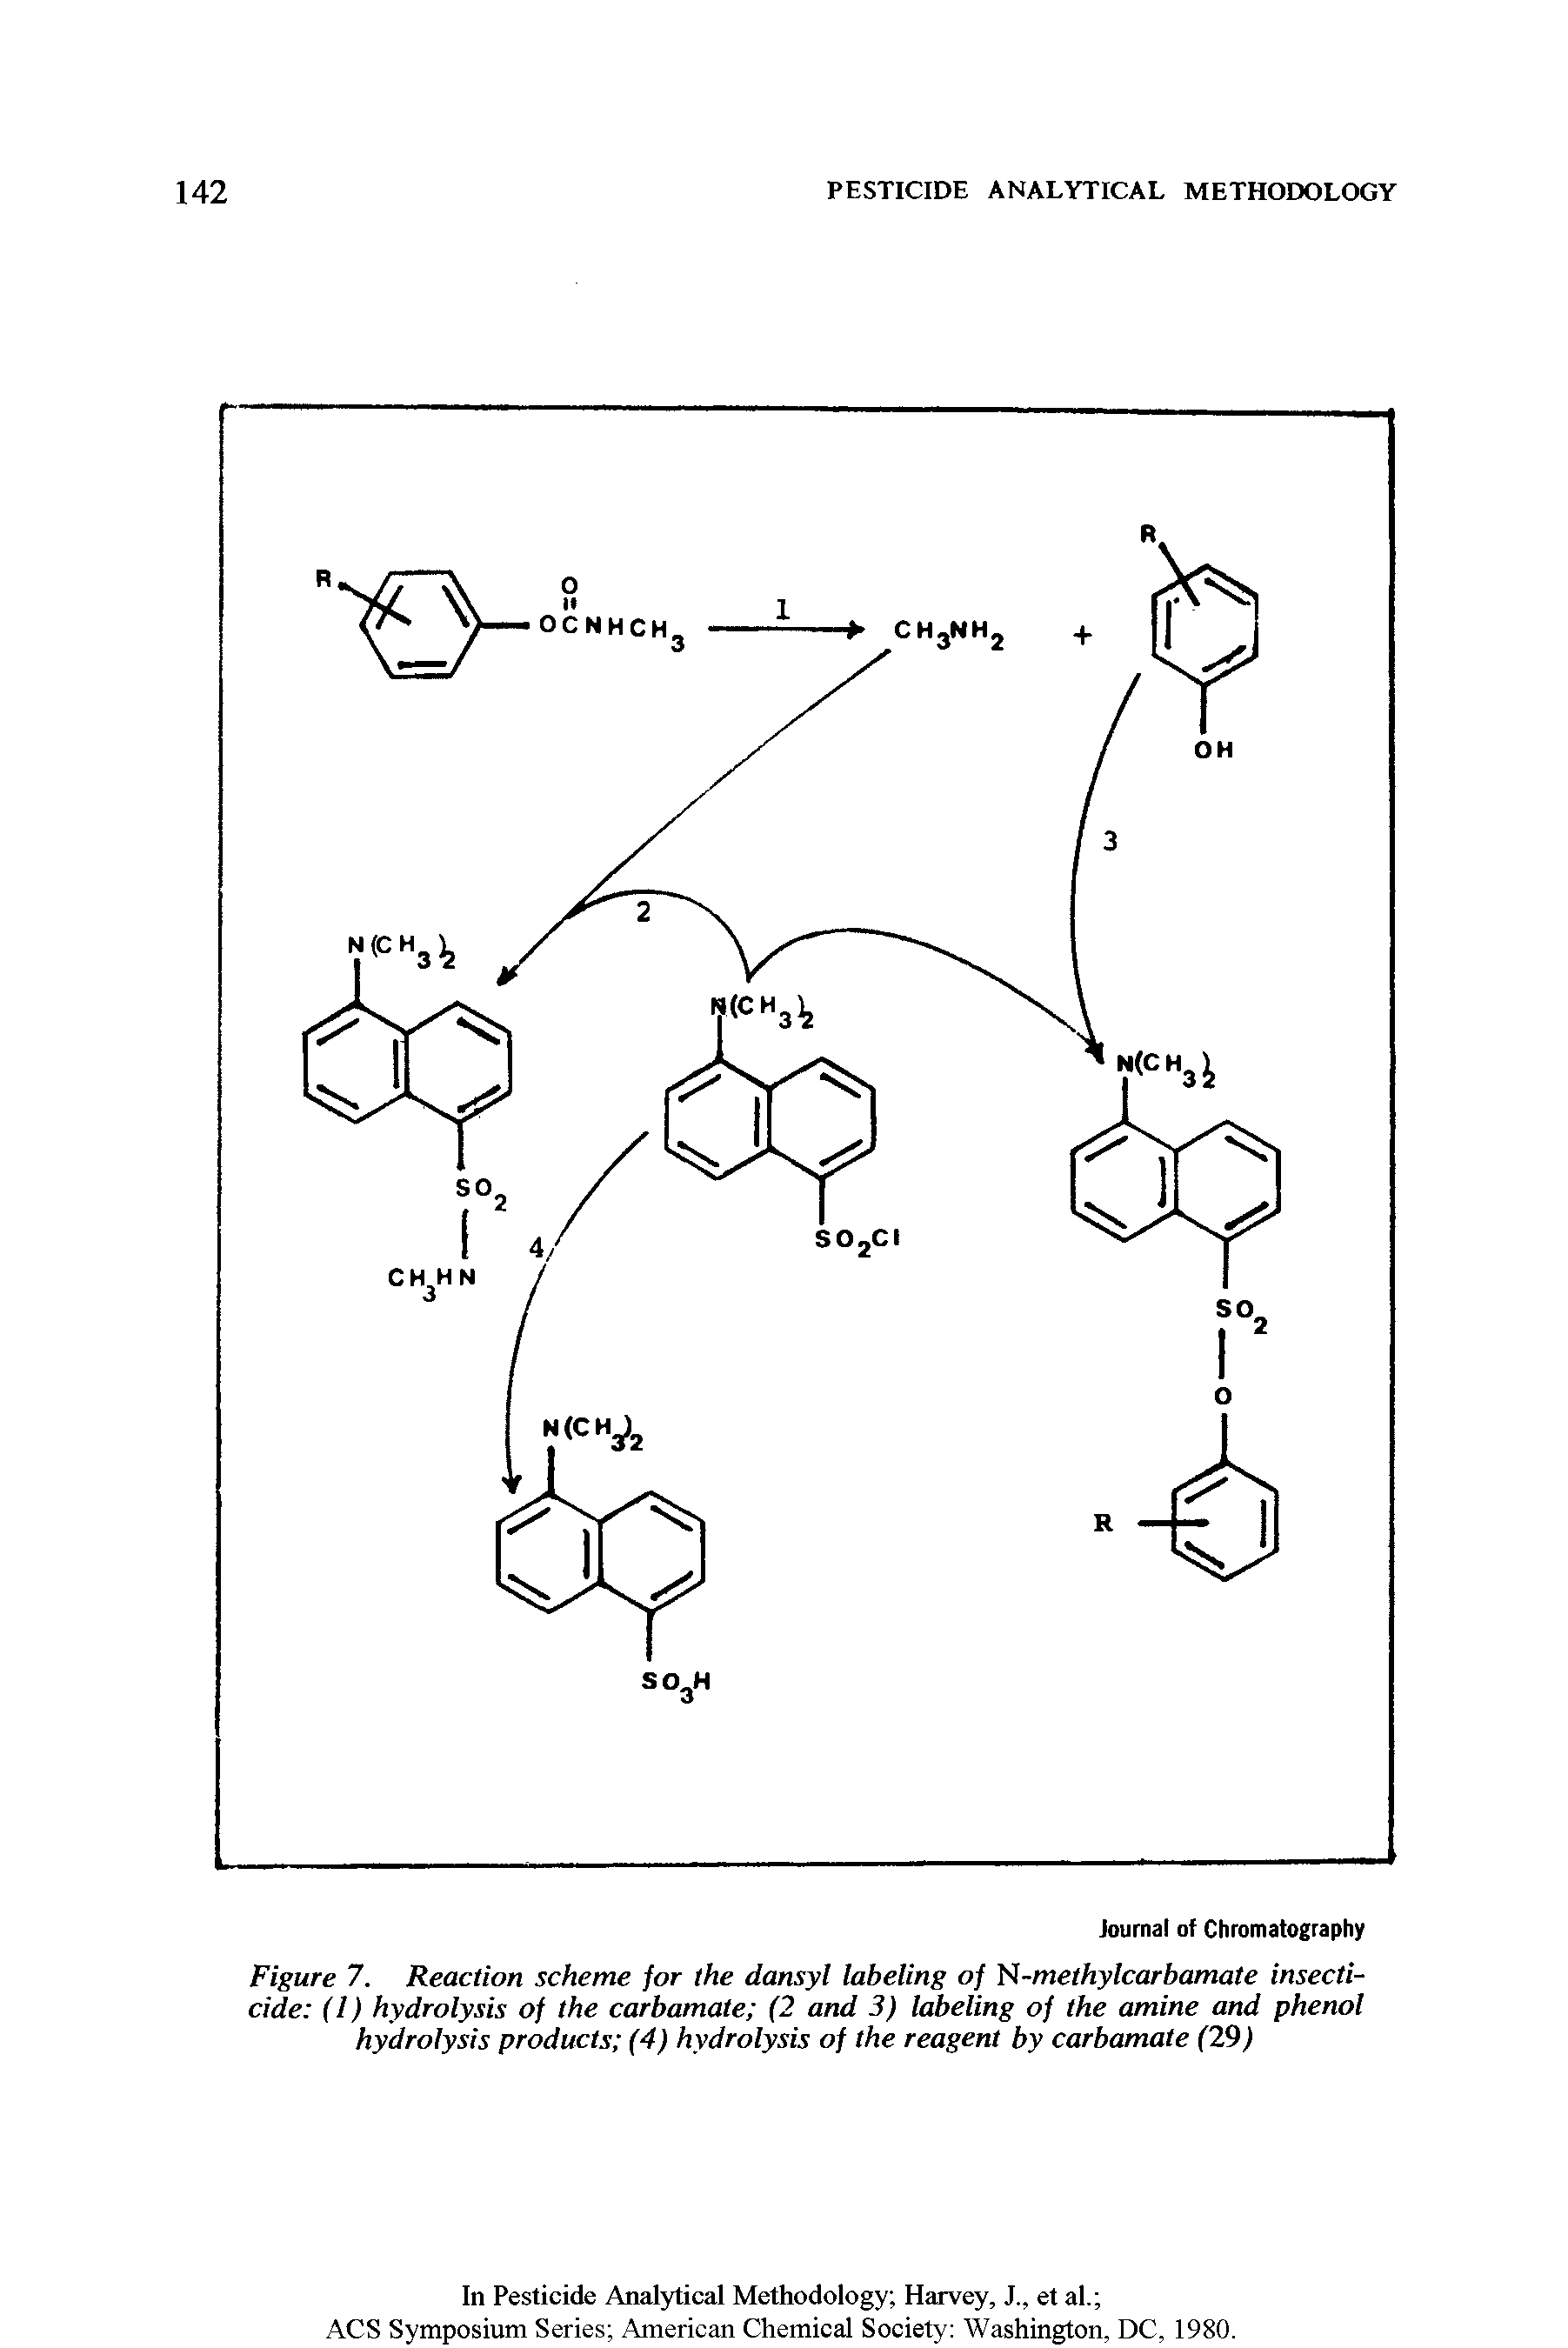 Figure 7. Reaction scheme for the dansyl labeling of N-methylcarhamate insecticide (l) hydrolysis of the carbamate (2 and 3) labeling of the amine and phenol hydrolysis products (4) hydrolysis of the reagent by carbamate (29)...